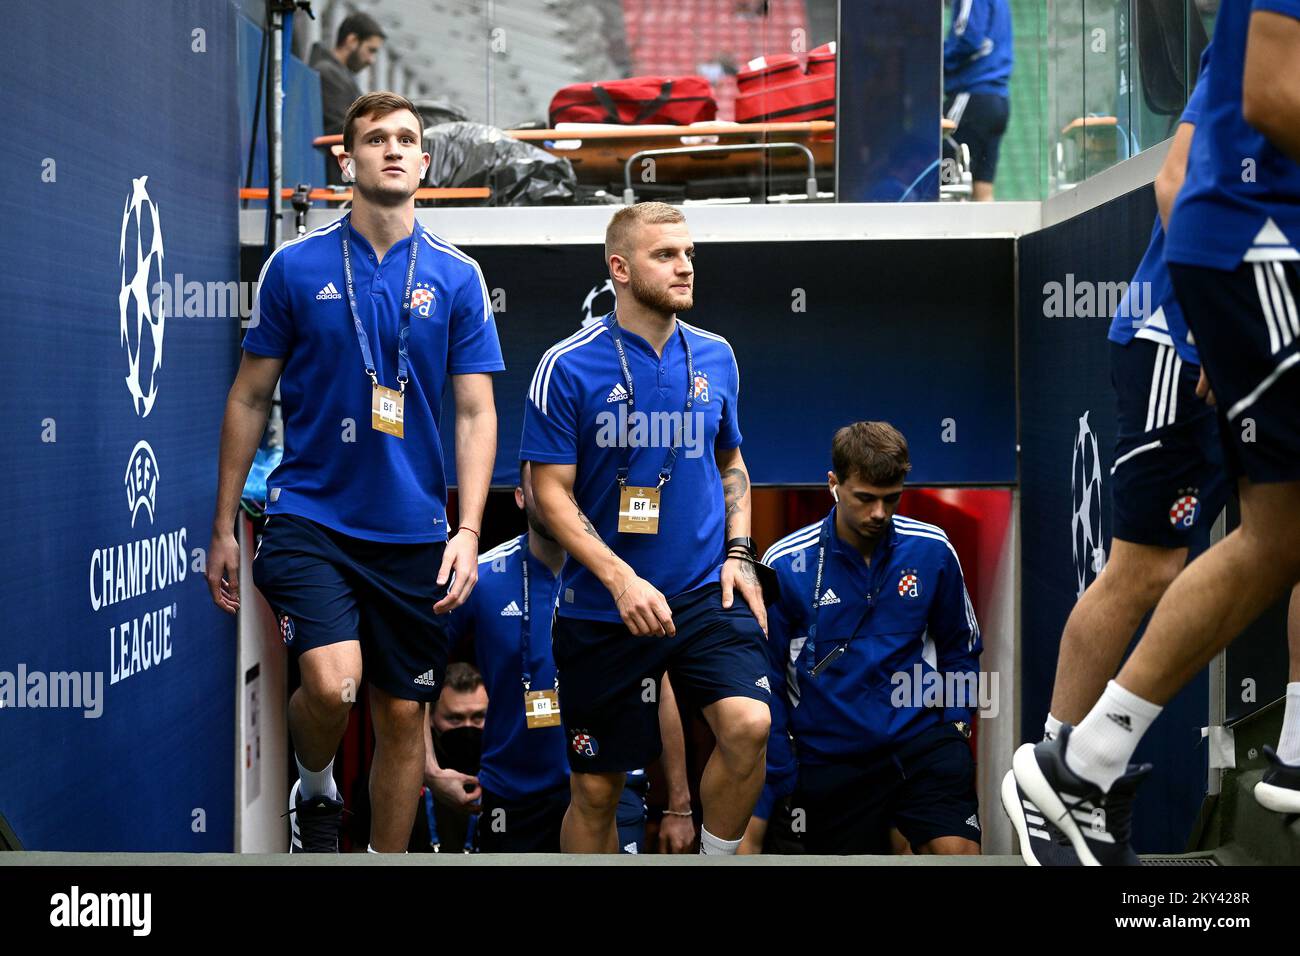 MILAN, ITALY - SEPTEMBER 14: Daniel Stefulj, Petar Bockaj and Dario Spikic of Dinamo Zagreb make their way out from the tunnel prior to the UEFA Champions League group E match between AC Milan and Dinamo Zagreb at Giuseppe Meazza Stadium on September 14, 2022 in Milan, Italy. Photo by Marko Lukunic/Pixsell Stock Photo